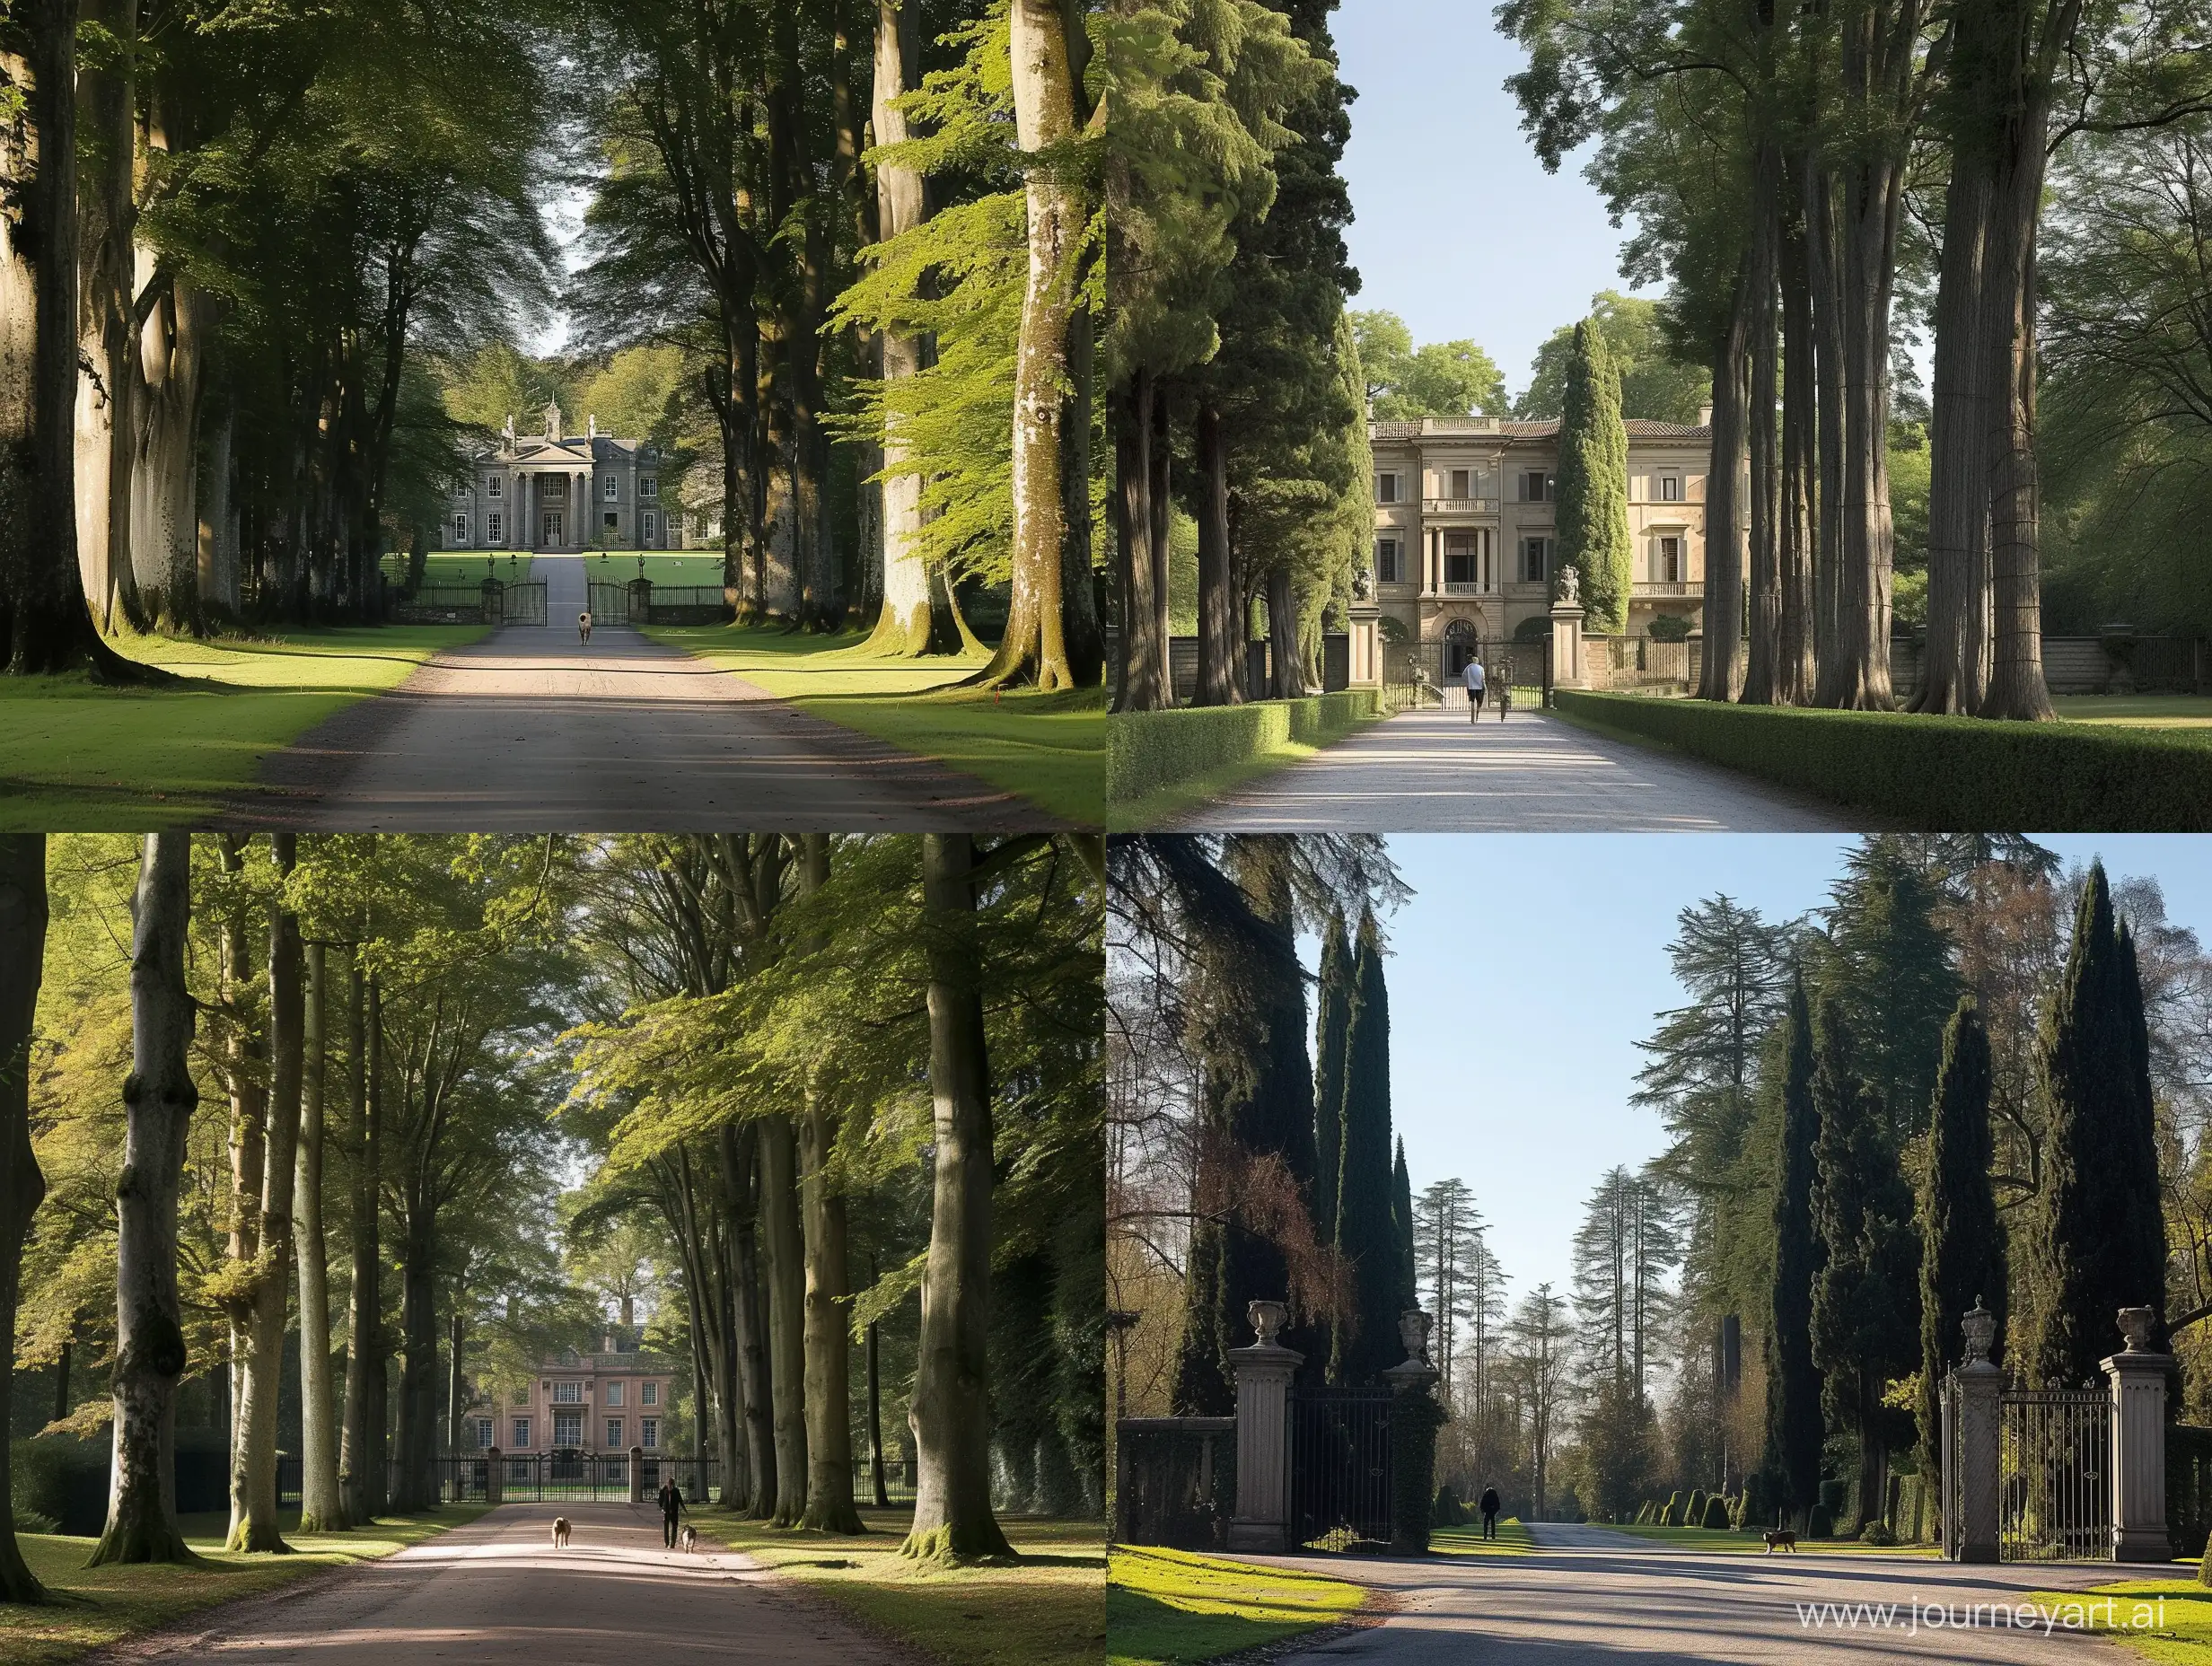 mansion
.tall trees line every inch of the edge of the estate and ari

there is only one road leading in and out of that place.

So if someone's walking their dog by the gate's entrance outside of the property,
